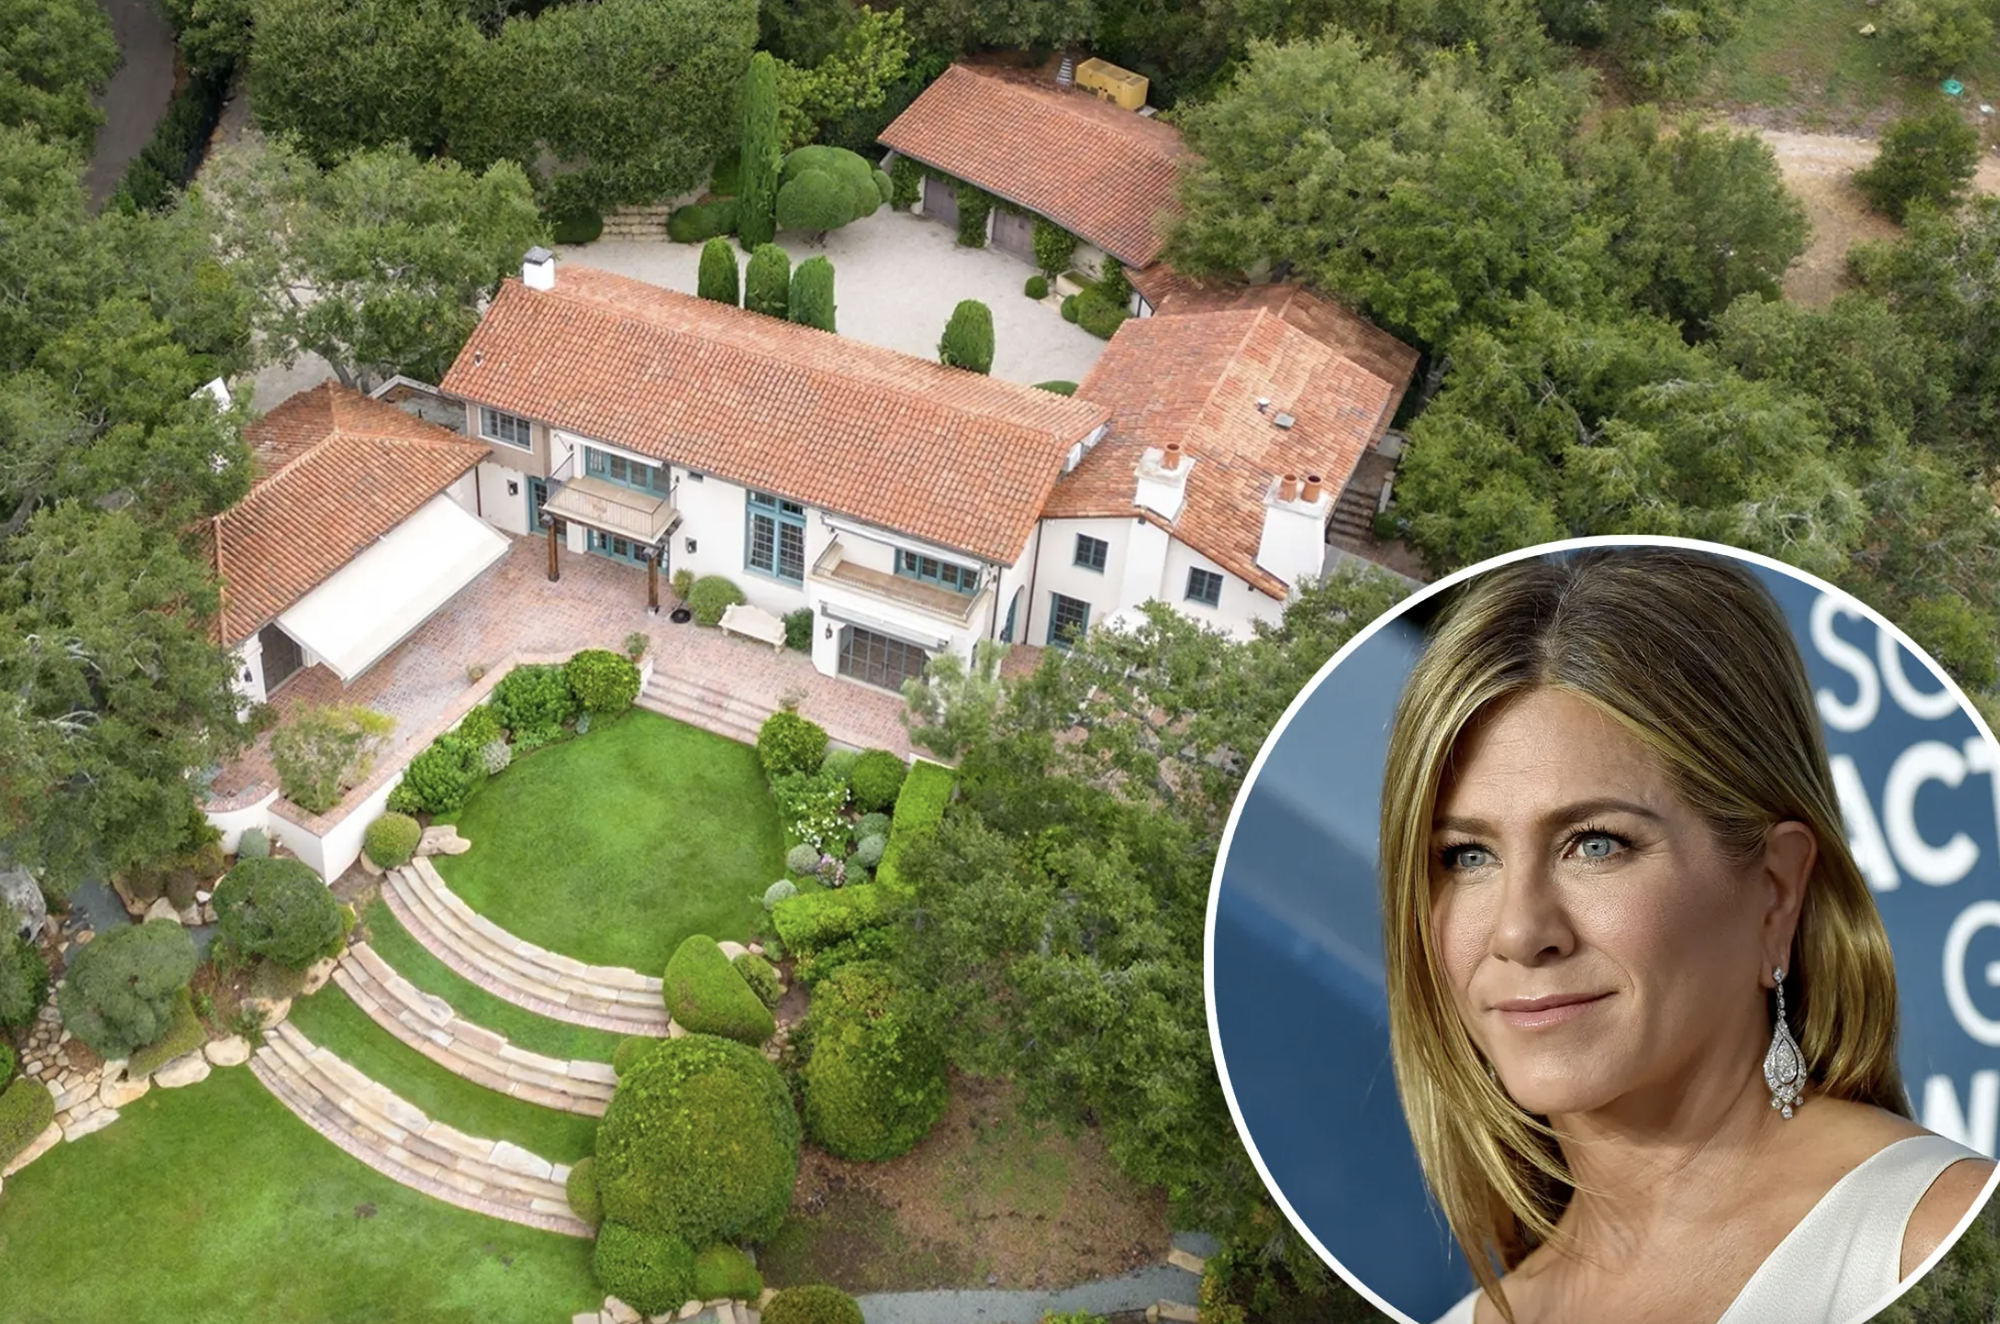 "The most beautiful woman in the world" Jennifer Aniston: Enjoying single life in a nearly 500 billion villa, feeling "peaceful" even though her journey to find a child by IVF failed - Photo 6.